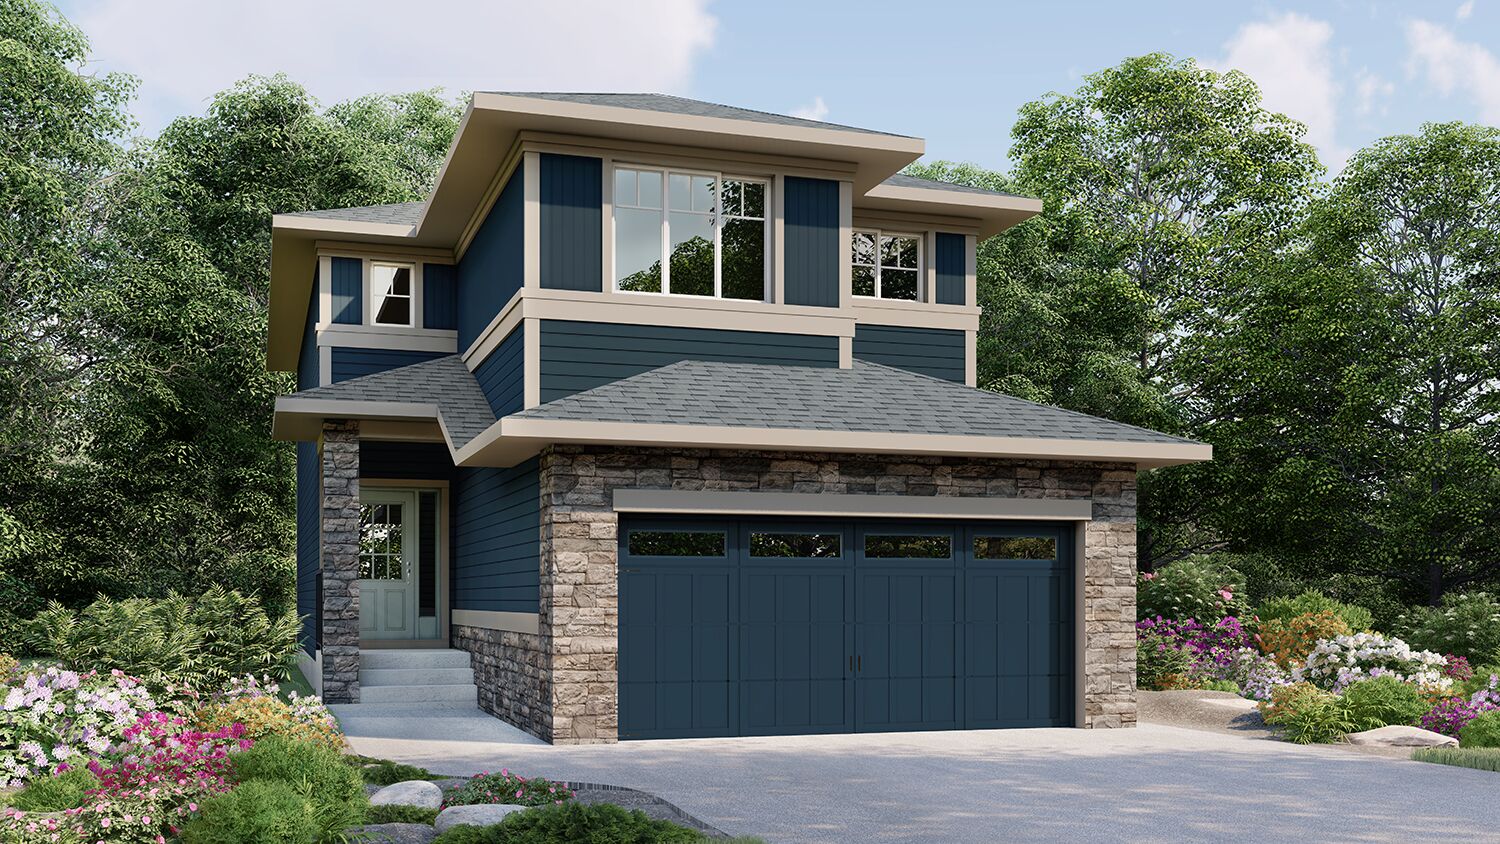 Exterior Rendering - Single Family House - Woodhaven